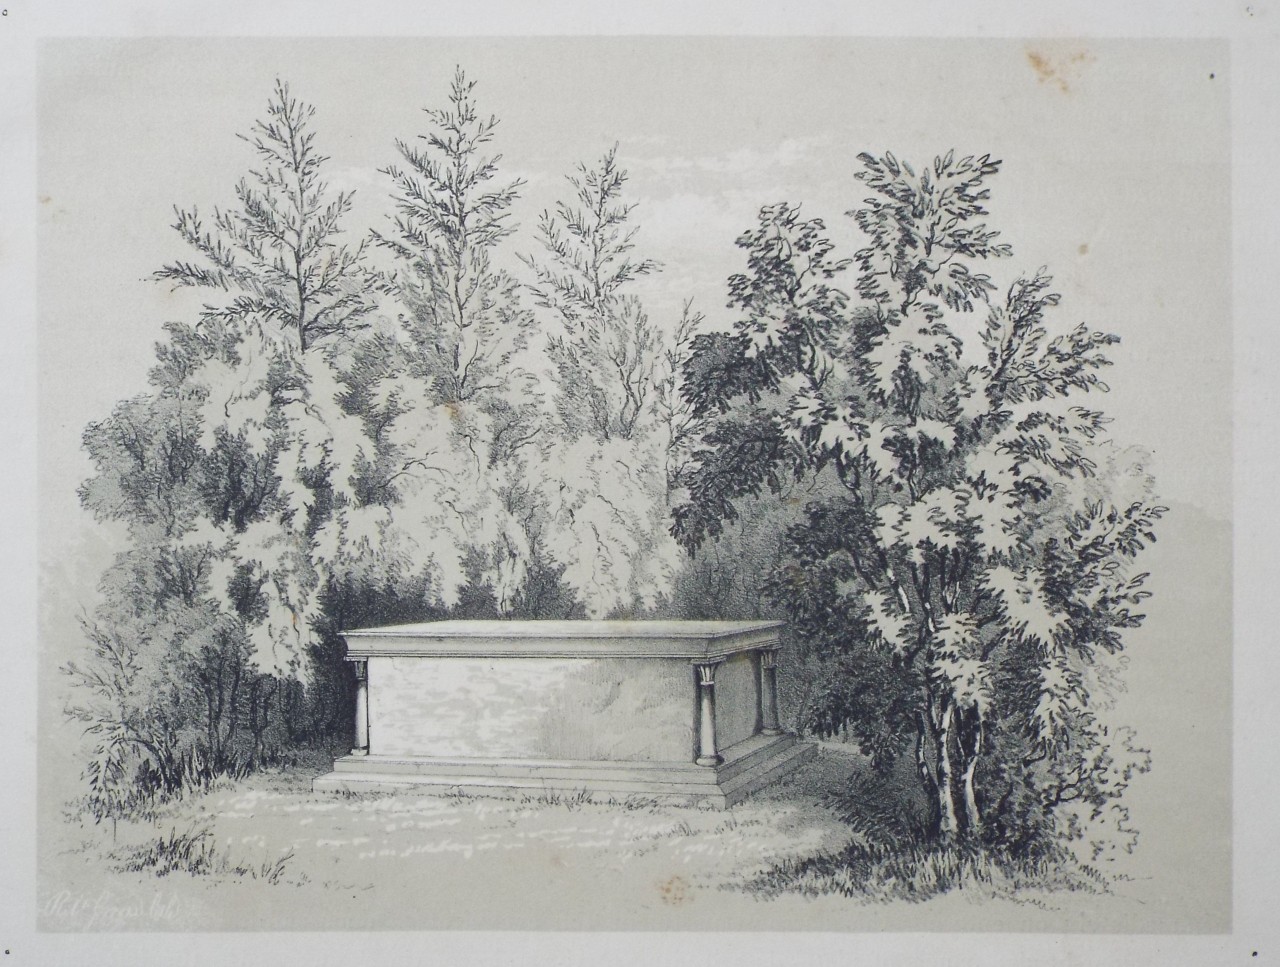 Lithograph - The Tomb of Mr. Beckford. - Groom